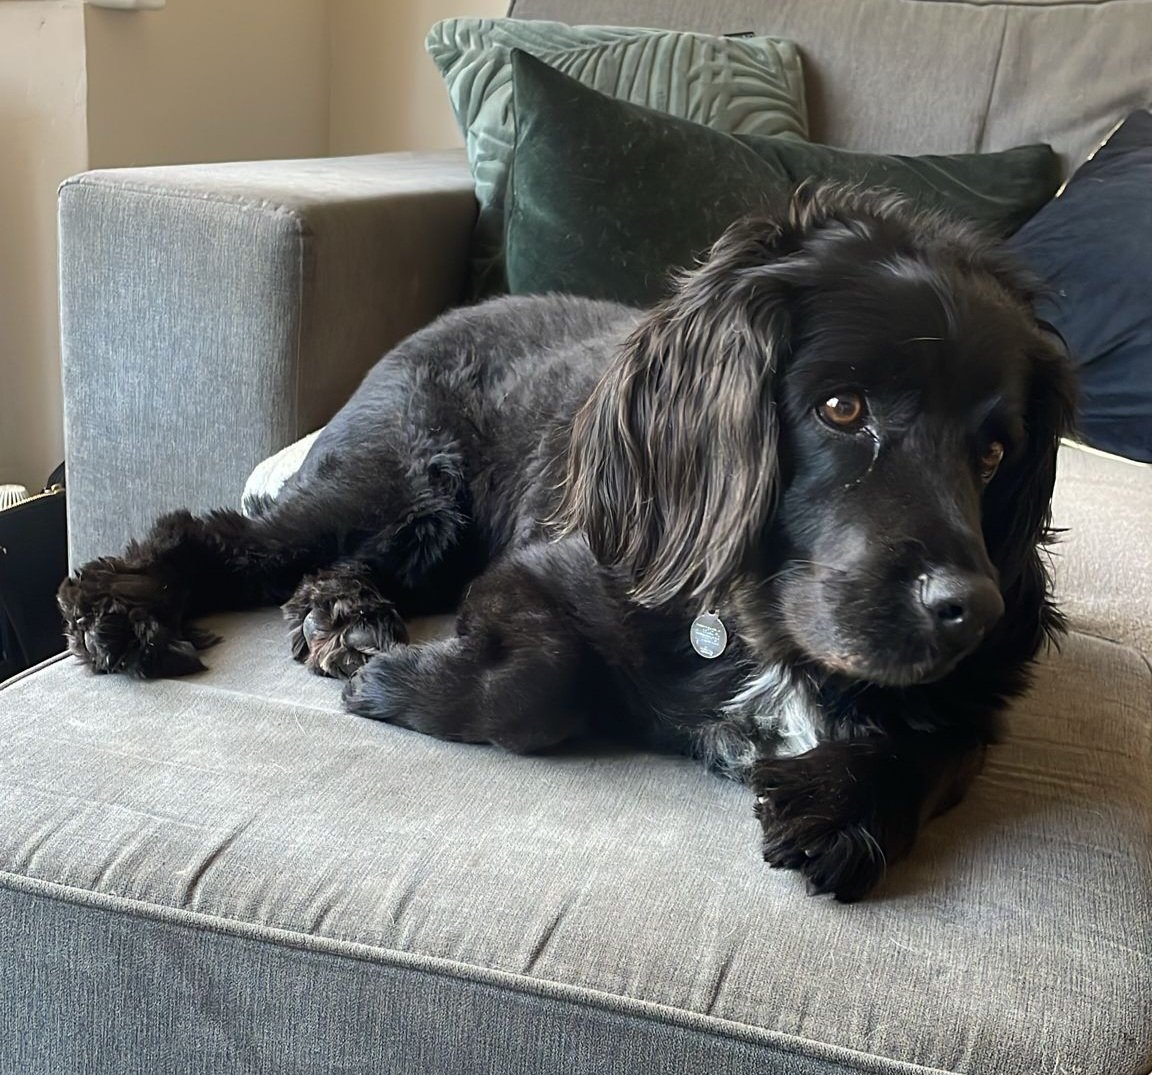 Rescue dog/cat parents, do you all talk to your darlings about their origin story? Lily's previous family were lovely people I'm sure, but their circumstances changed so she came to live with us nearly 7 years ago 🥰 #spanielsofX #rescuedogs